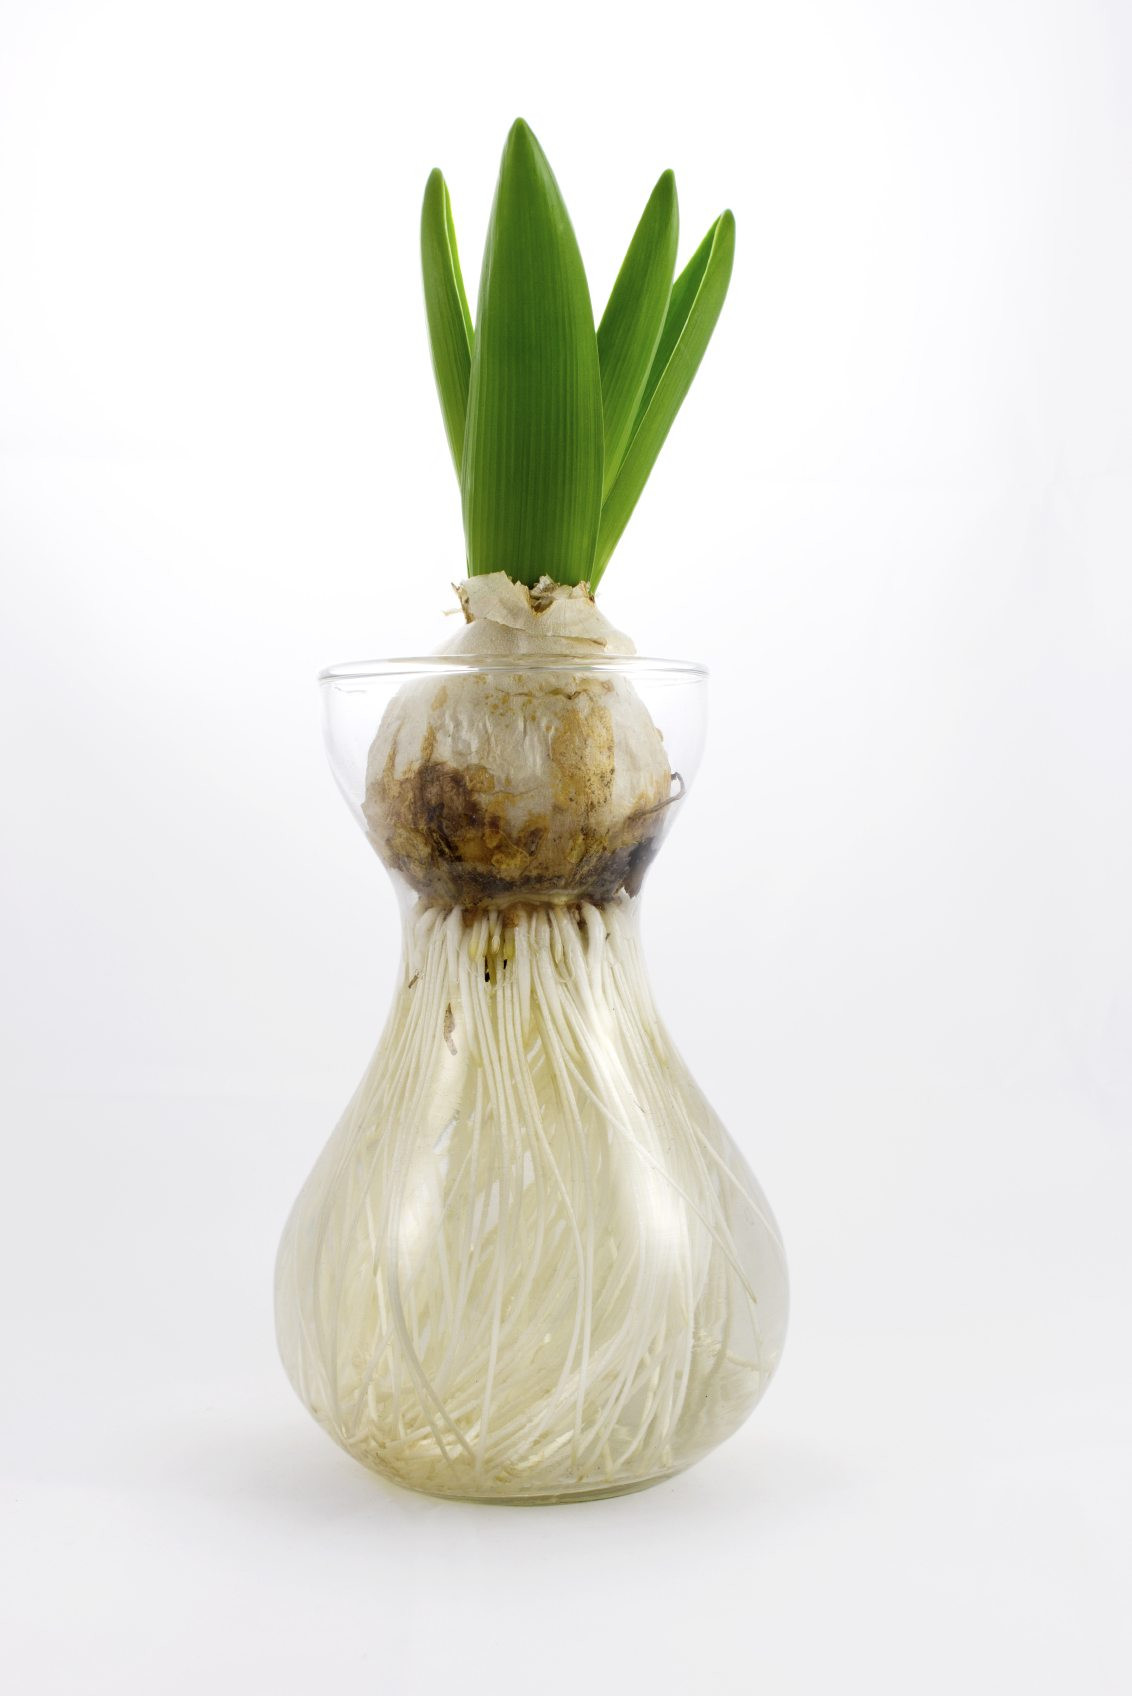 18 Awesome Tulip Vase Amsterdam 2024 free download tulip vase amsterdam of can tulips grow in water tips on growing tulips without soil throughout tulip water